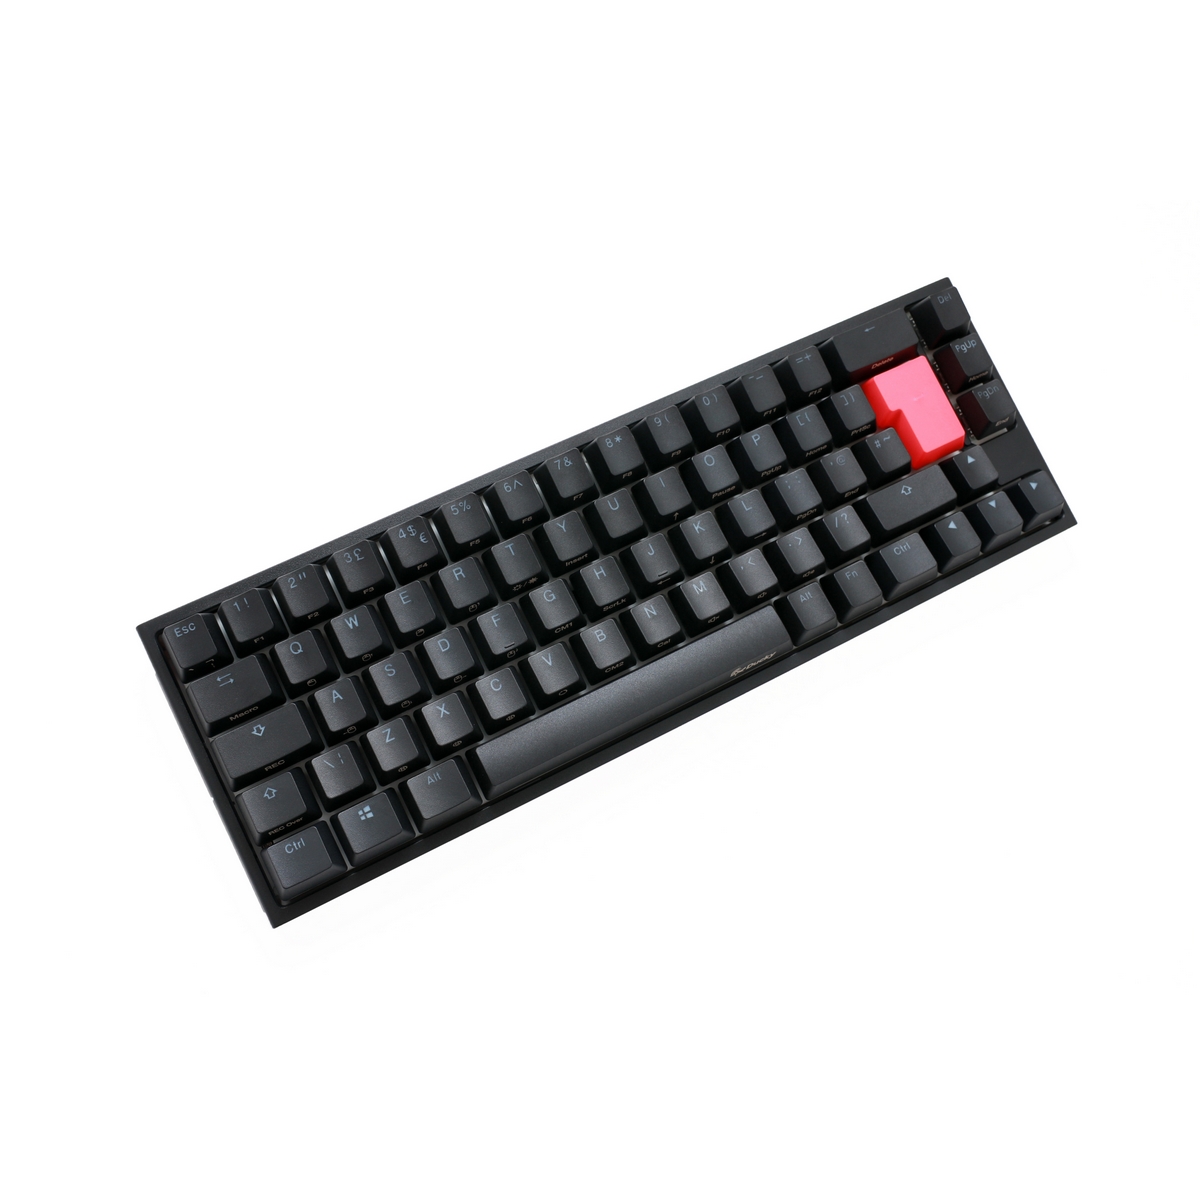 Ducky - Ducky One 2 SF 65% RGB Backlit Red Cherry MX Switch Mechanical USB Gaming Keyboard UK Layout